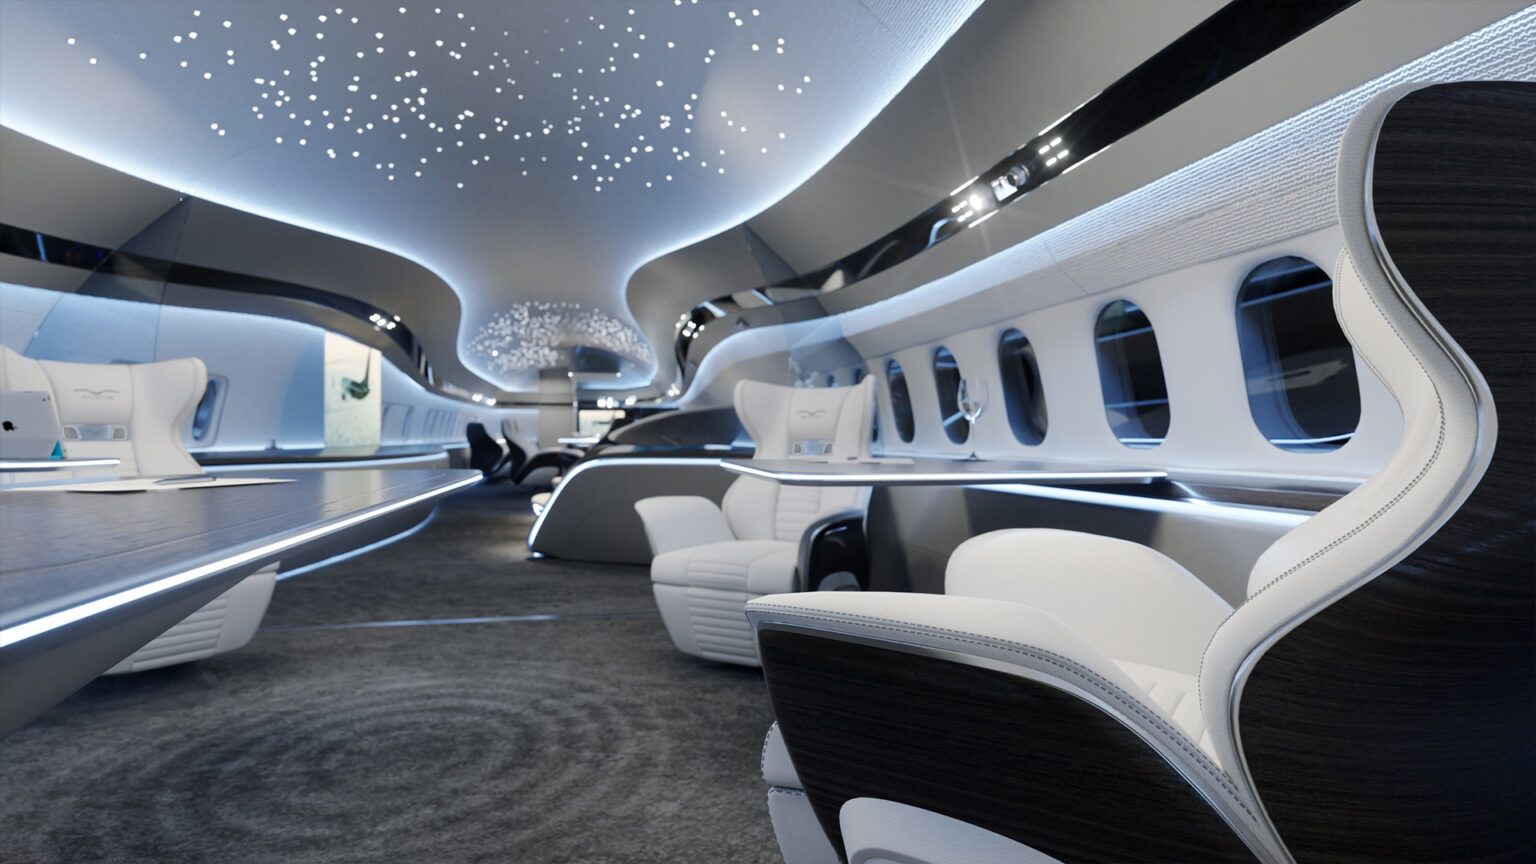 BBJ Max 7 Renderings and Animation by SkyStyle